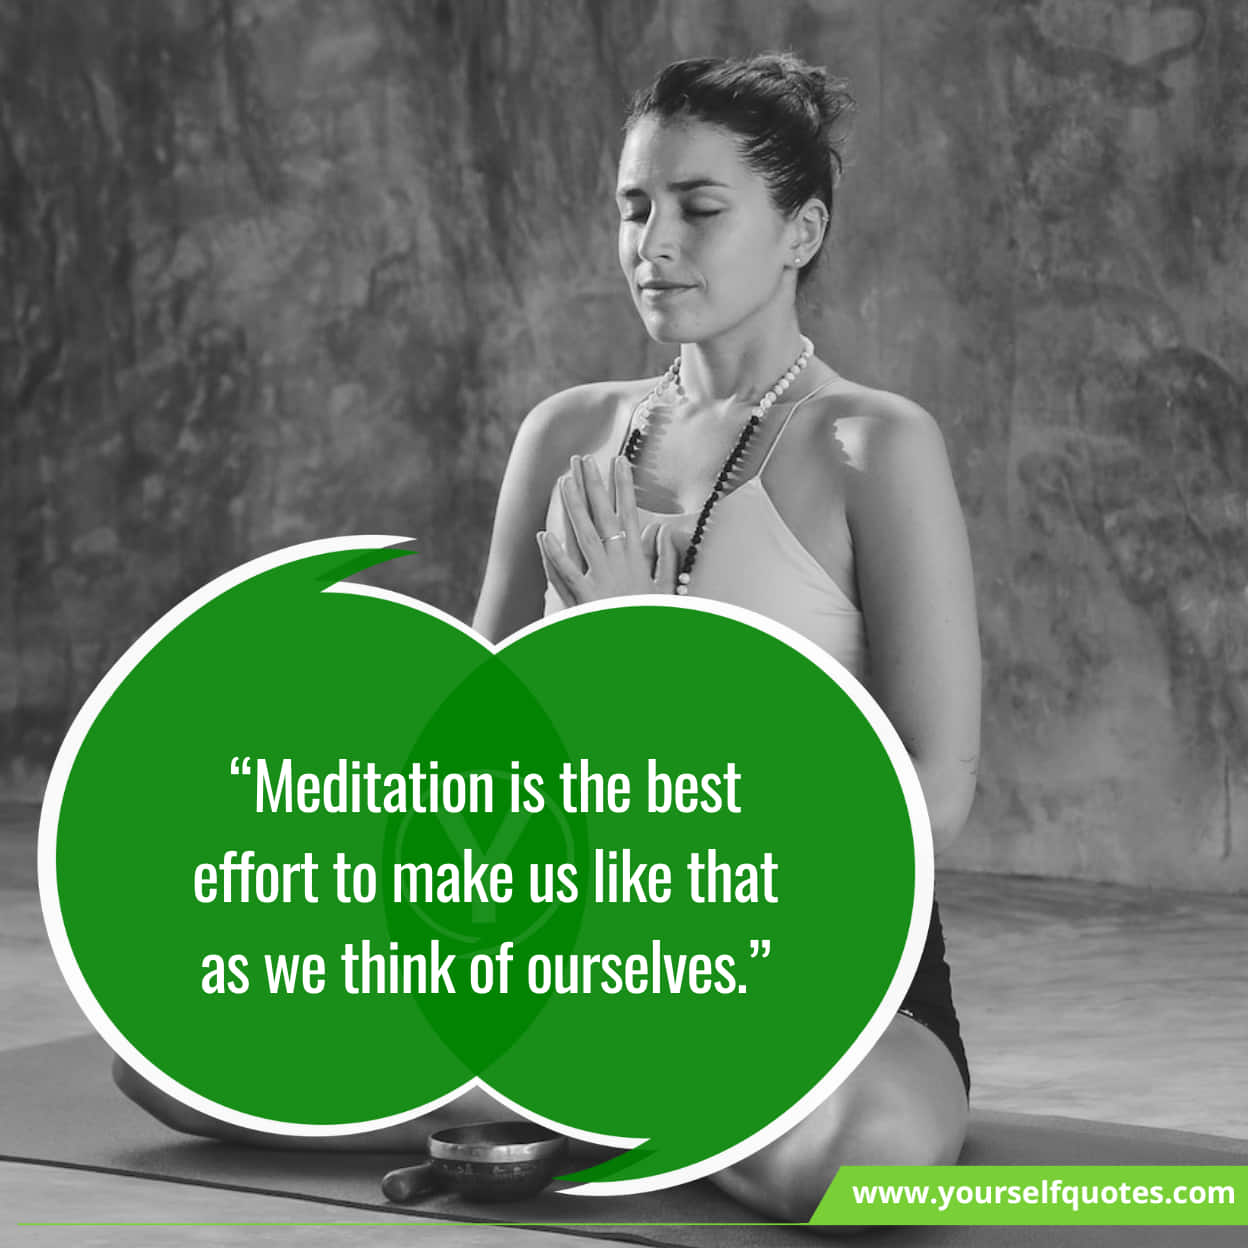 Famous Quotes On Meditation